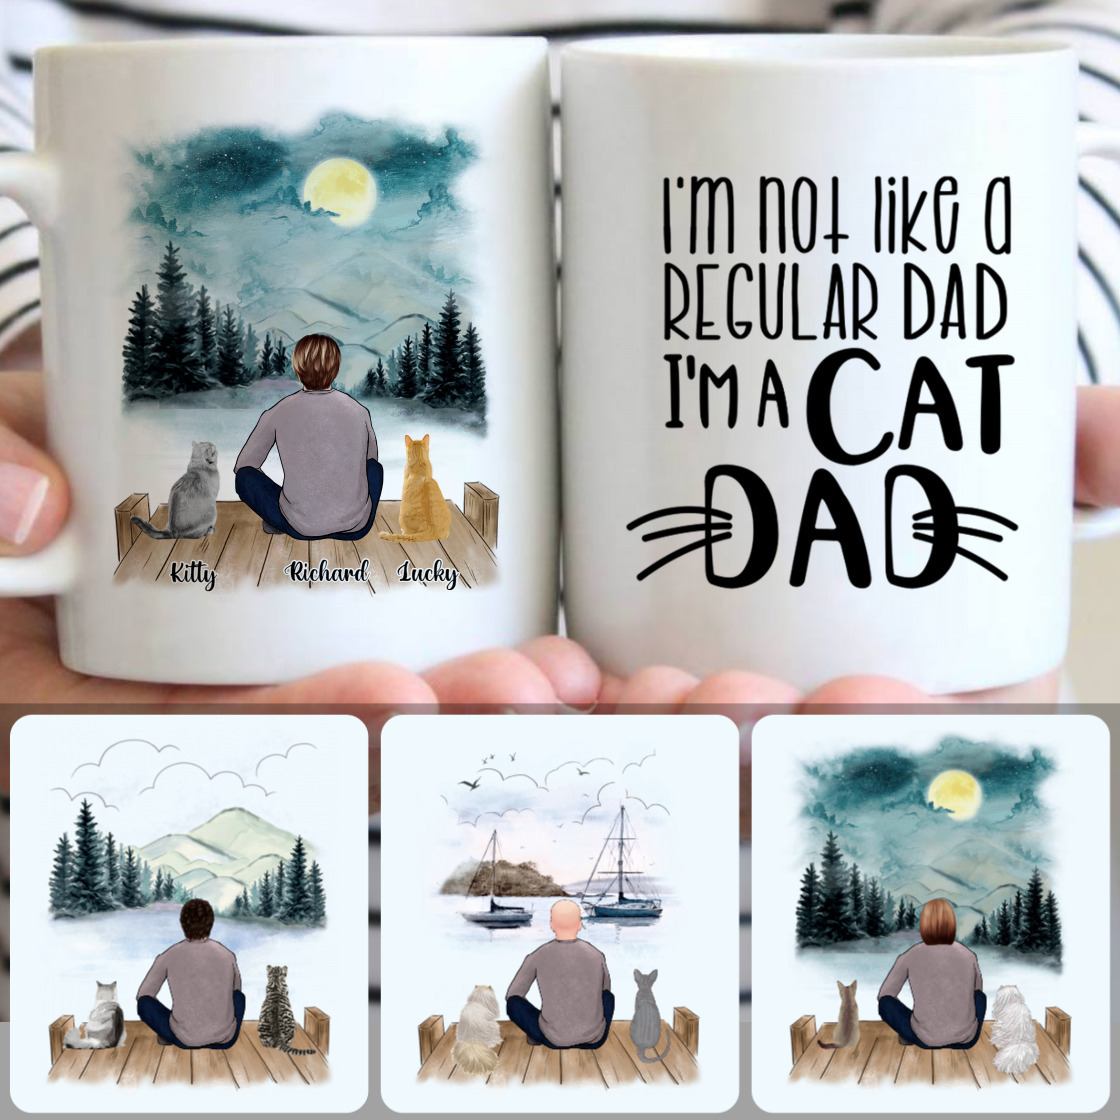 Personalized Mug, Best Gifts For Cat Lovers, Man & 2 Cats Customized Coffee Mug With Names